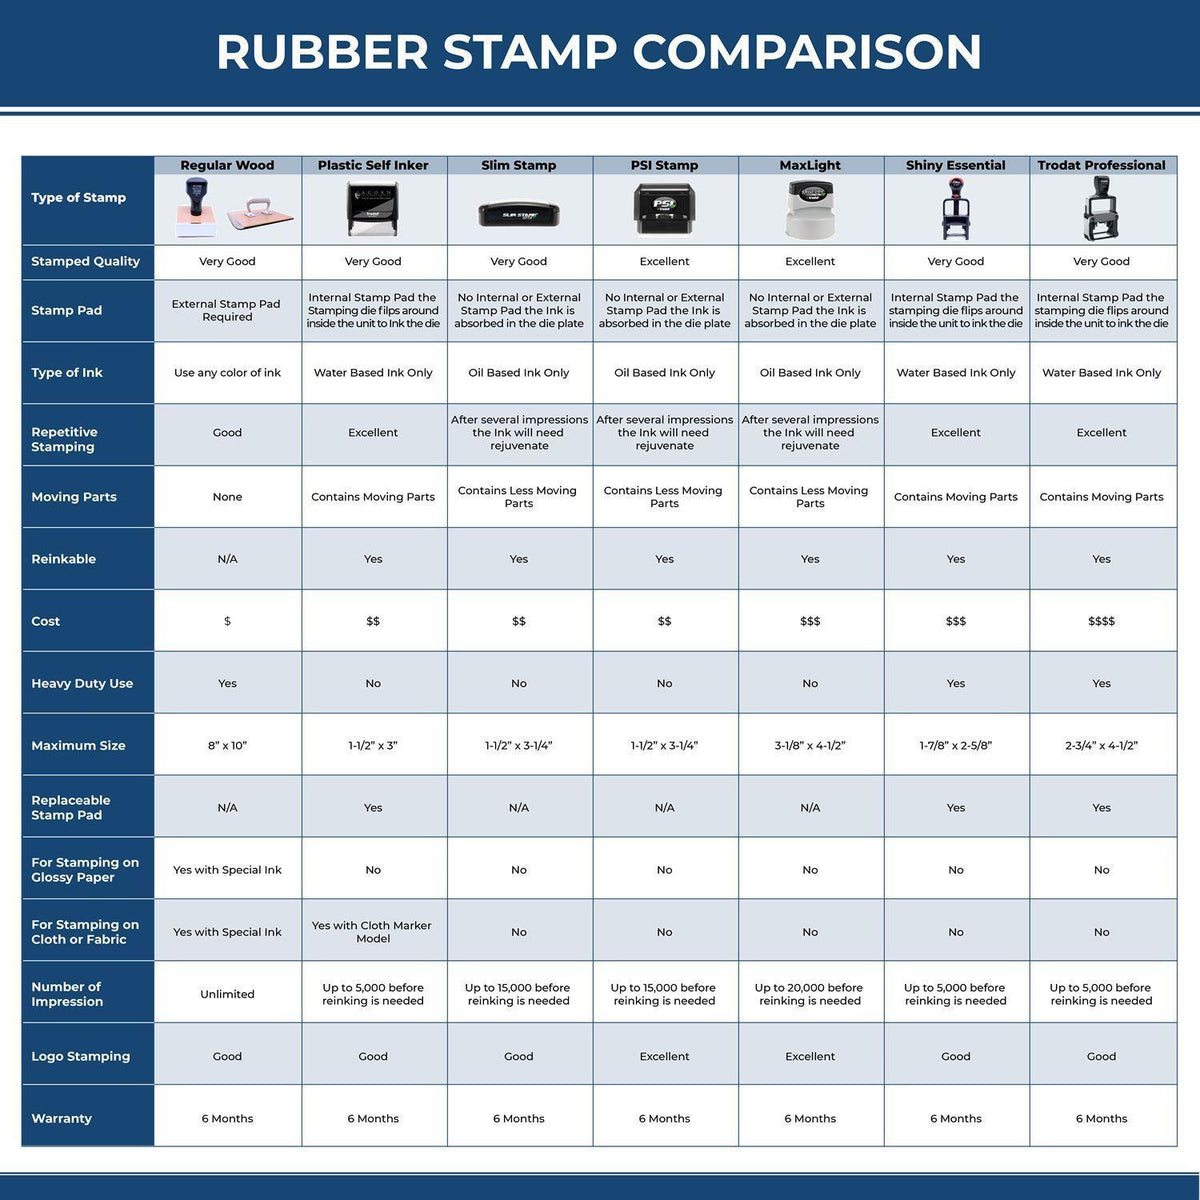 Large Pre-Inked Narrow Confidential Stamp 5643SLIM Rubber Stamp Comparison